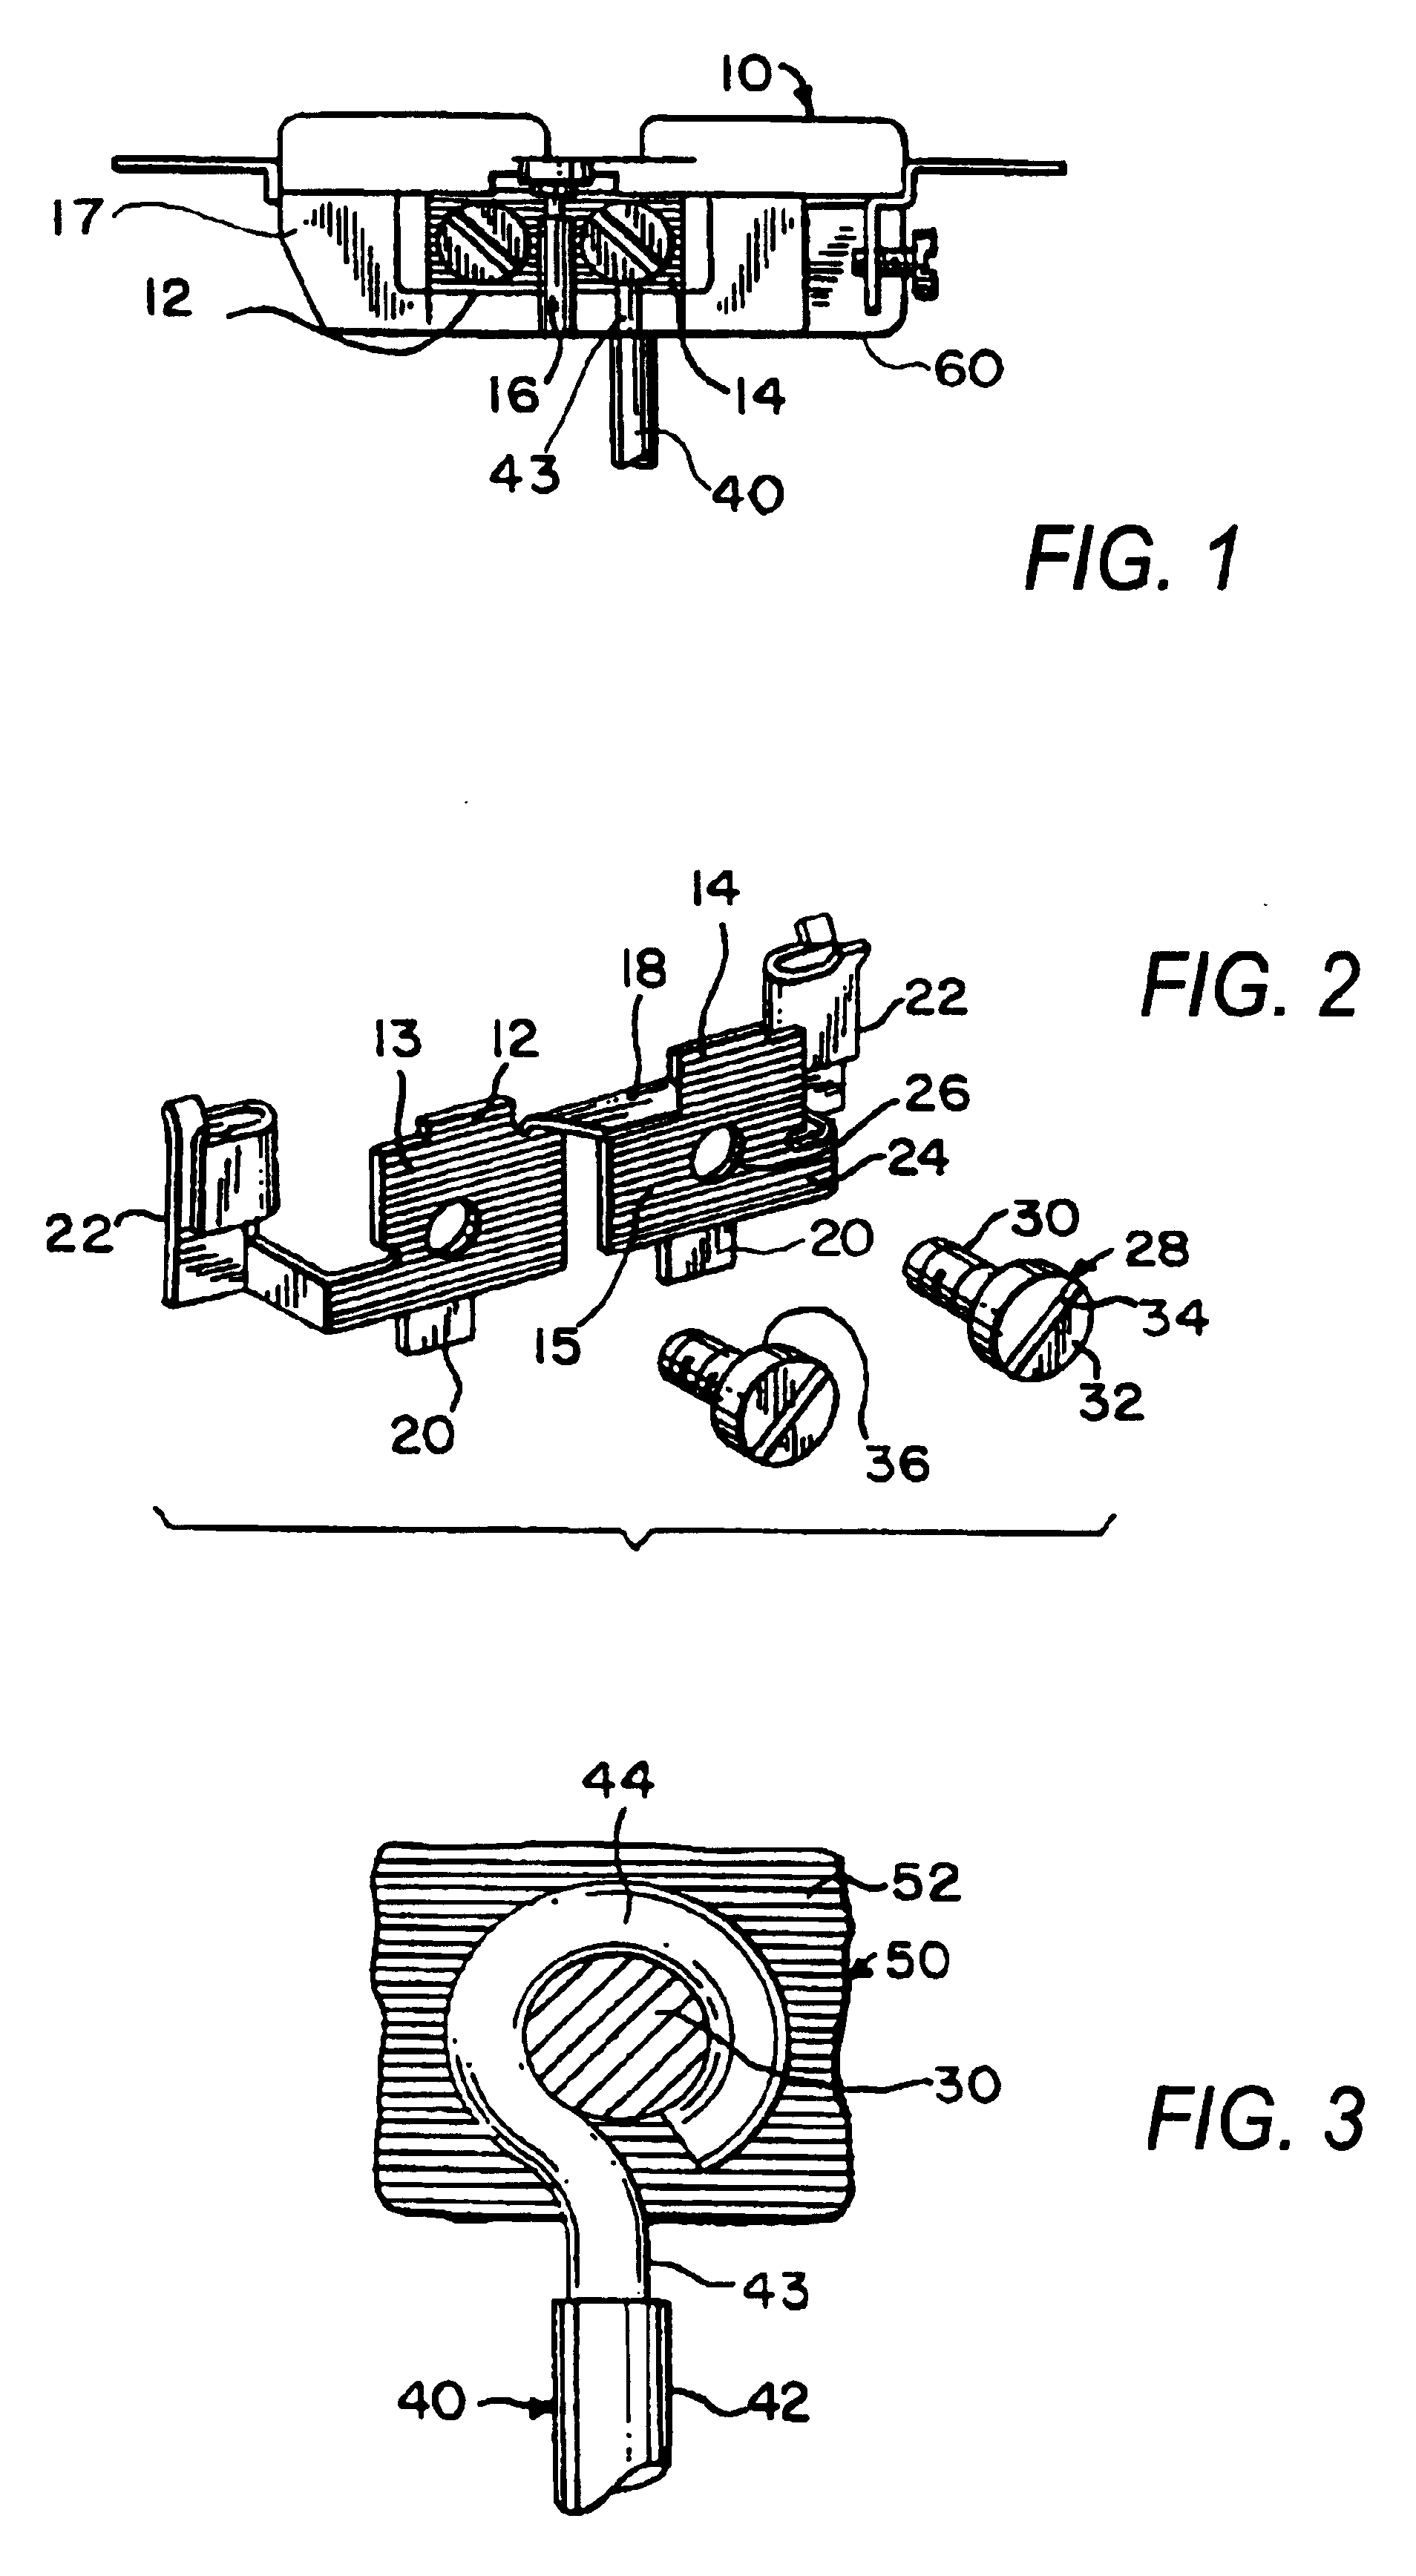 Electrical wiring device with multiple types of wire terminations